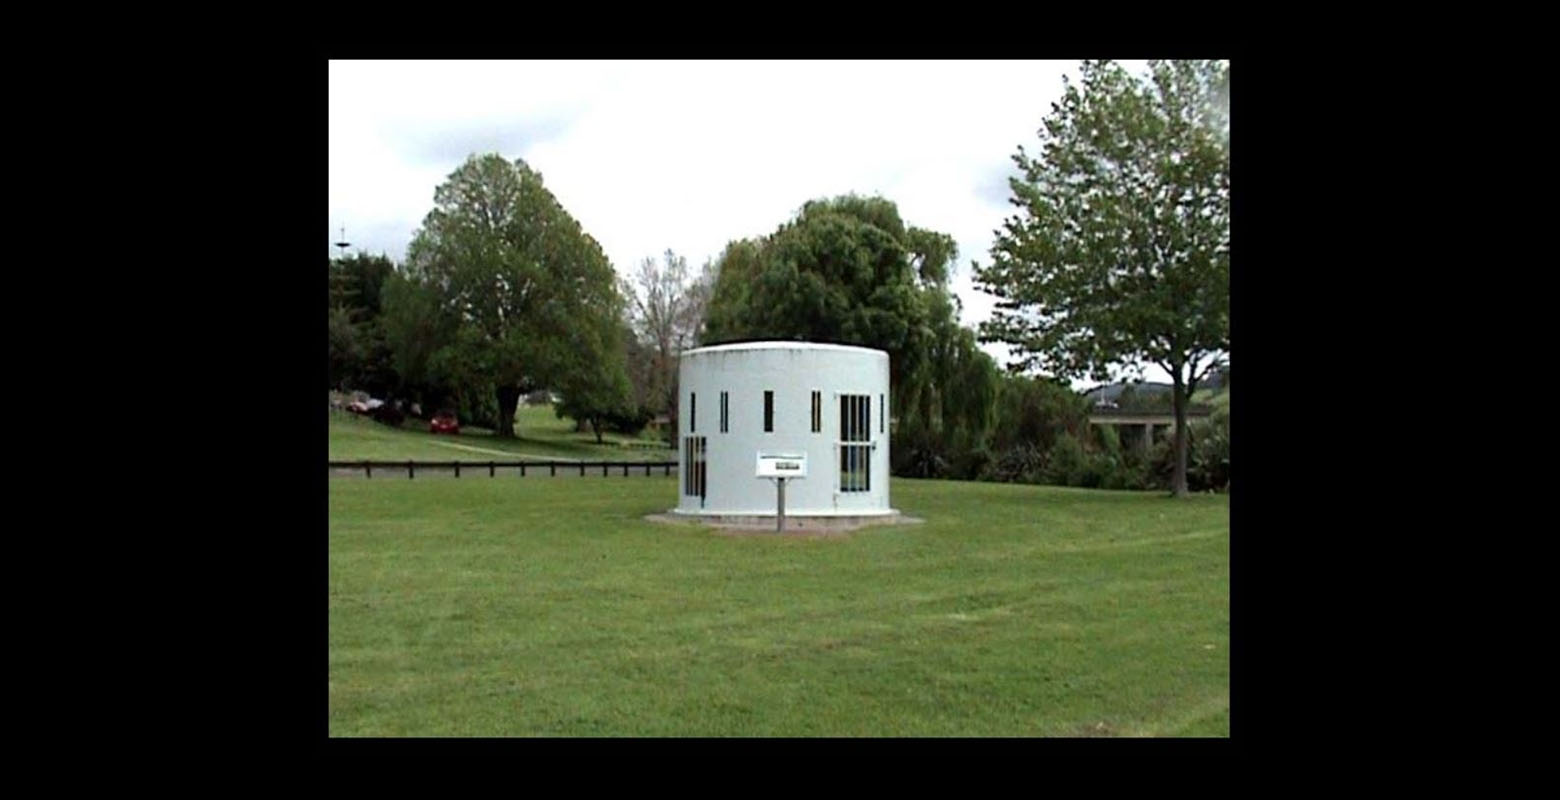 Still from a video. Pictured is a small circular building with a flat roof in a lawn. Behind it are trees, which partially obscure a building, and a road